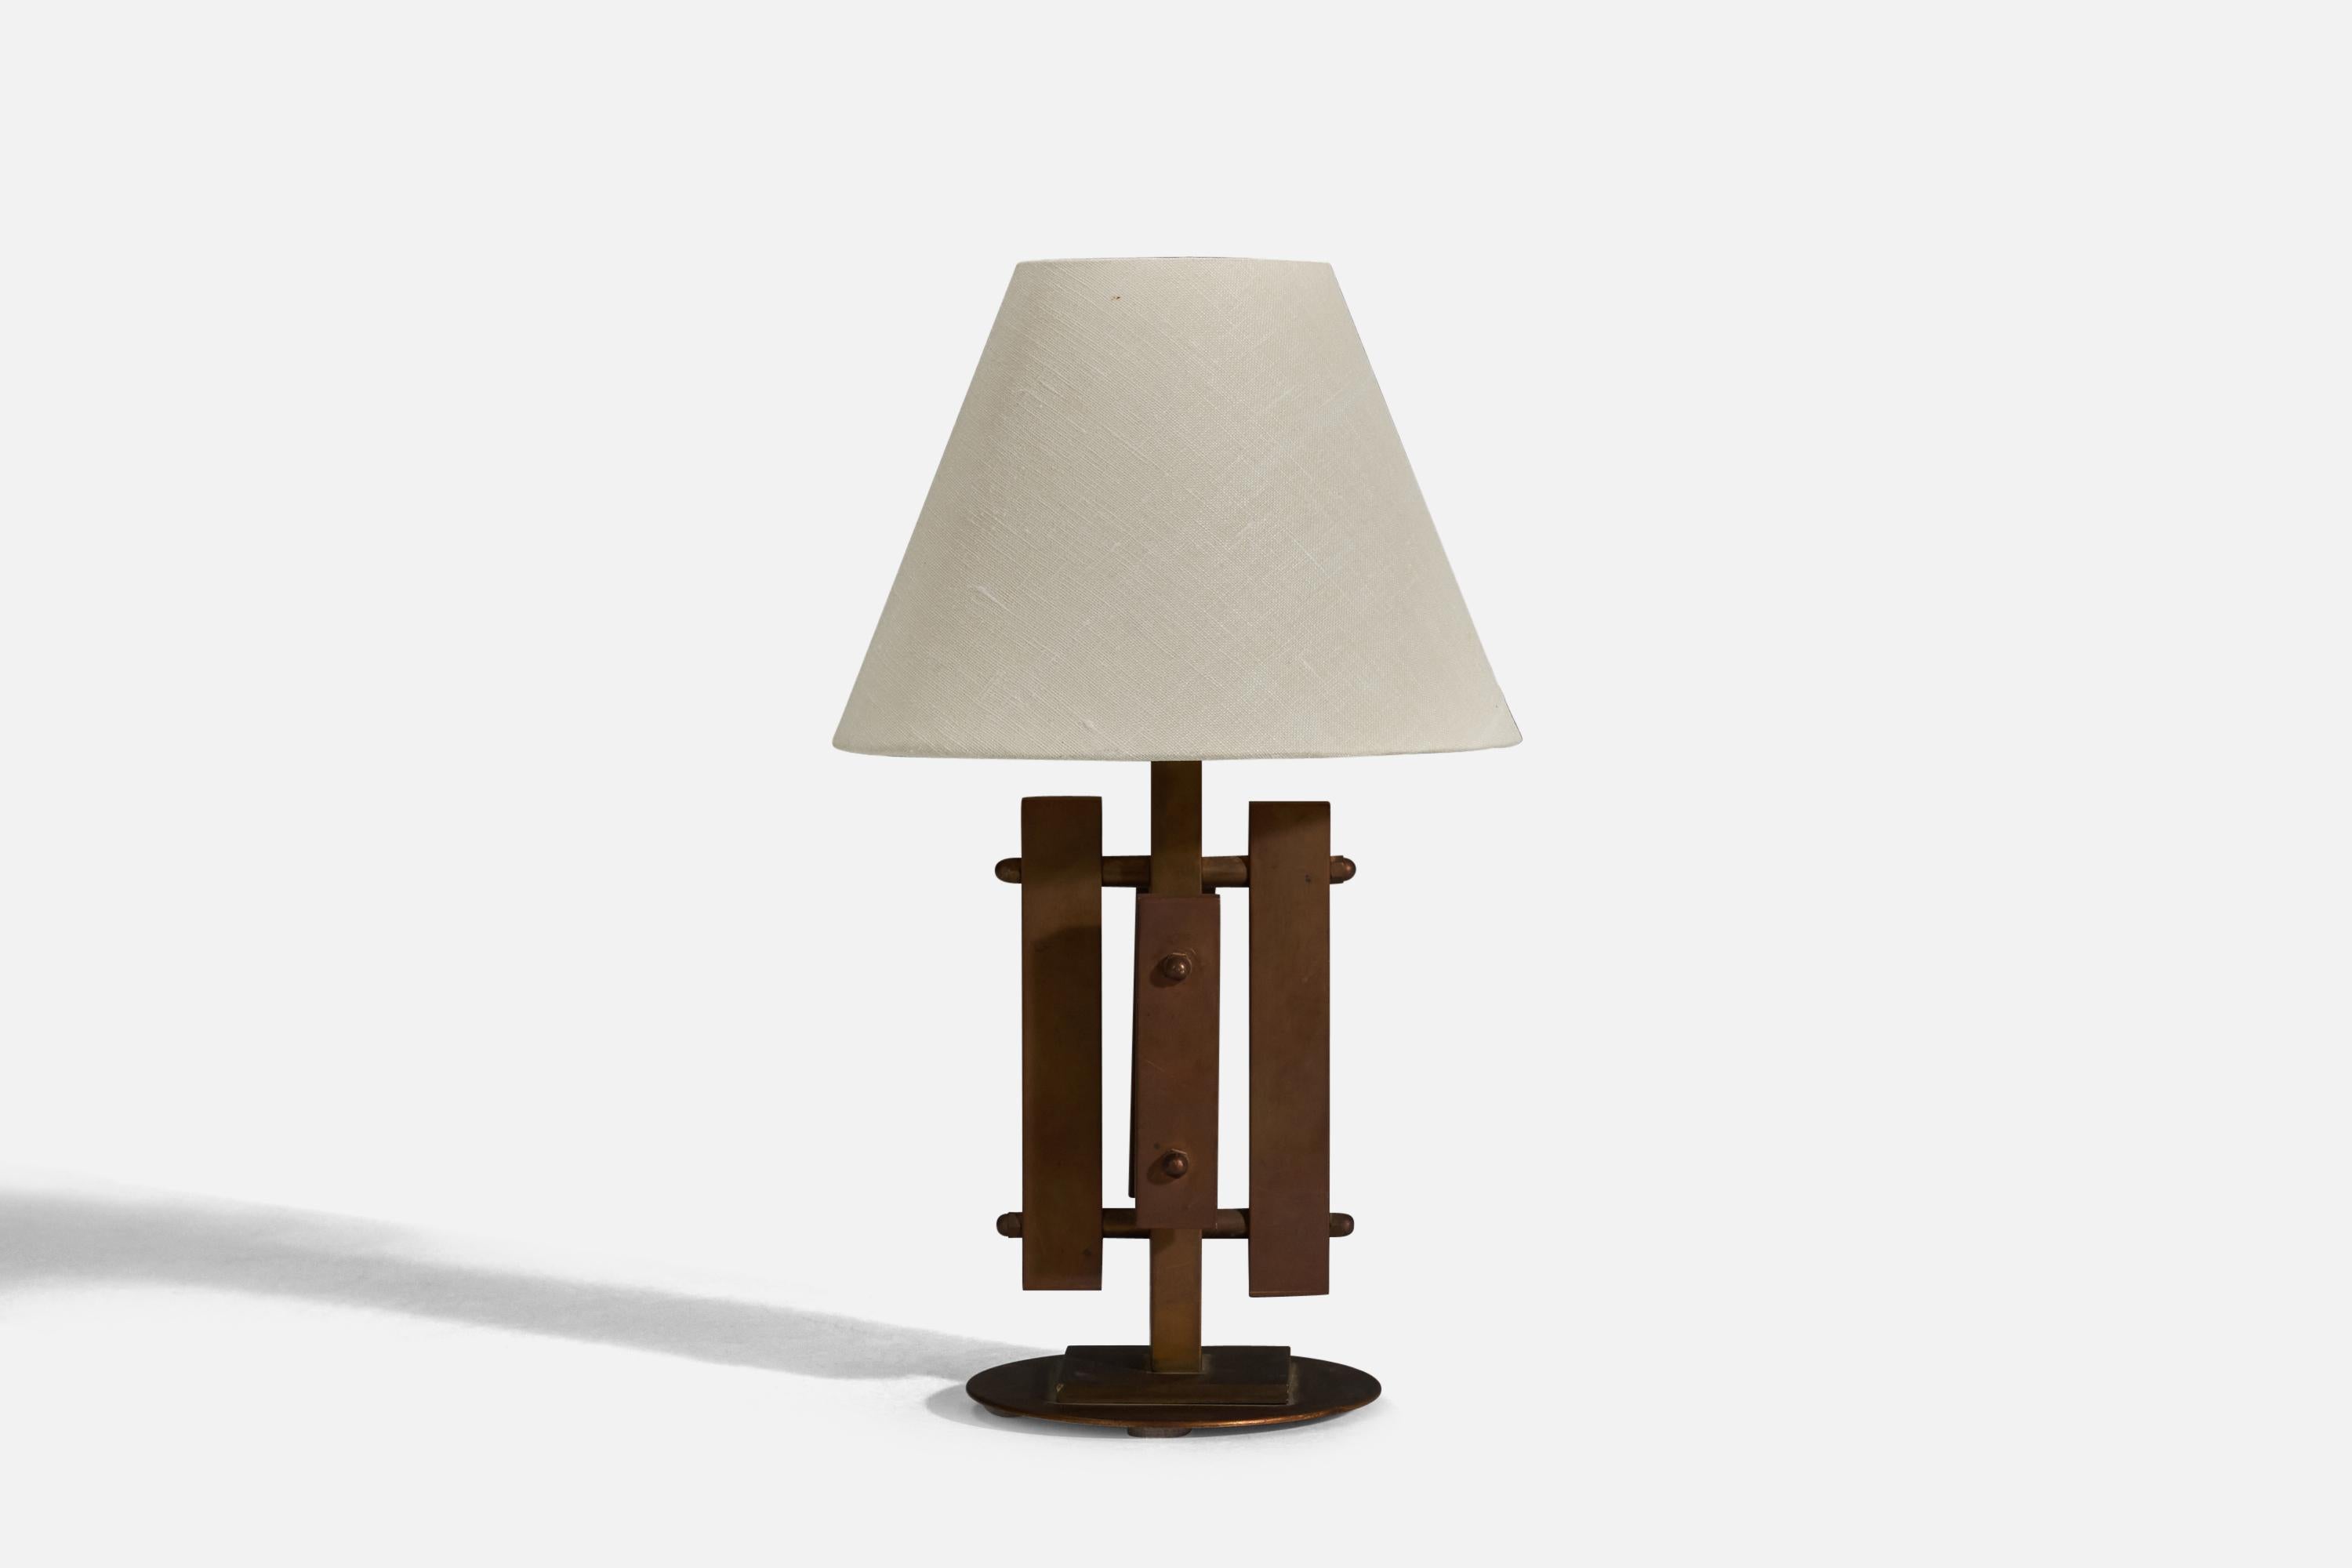 A brass table lamp designed and produced in Denmark, 1960s. 

Sold without Lampshade
Dimensions of Lamp (inches) : 10.87 x 5.12 x 5.12 (Height x Width x Depth)
Dimensions of Lampshade (inches) : 4 x 8 x 6 (Top Diameter x Bottom Diameter x